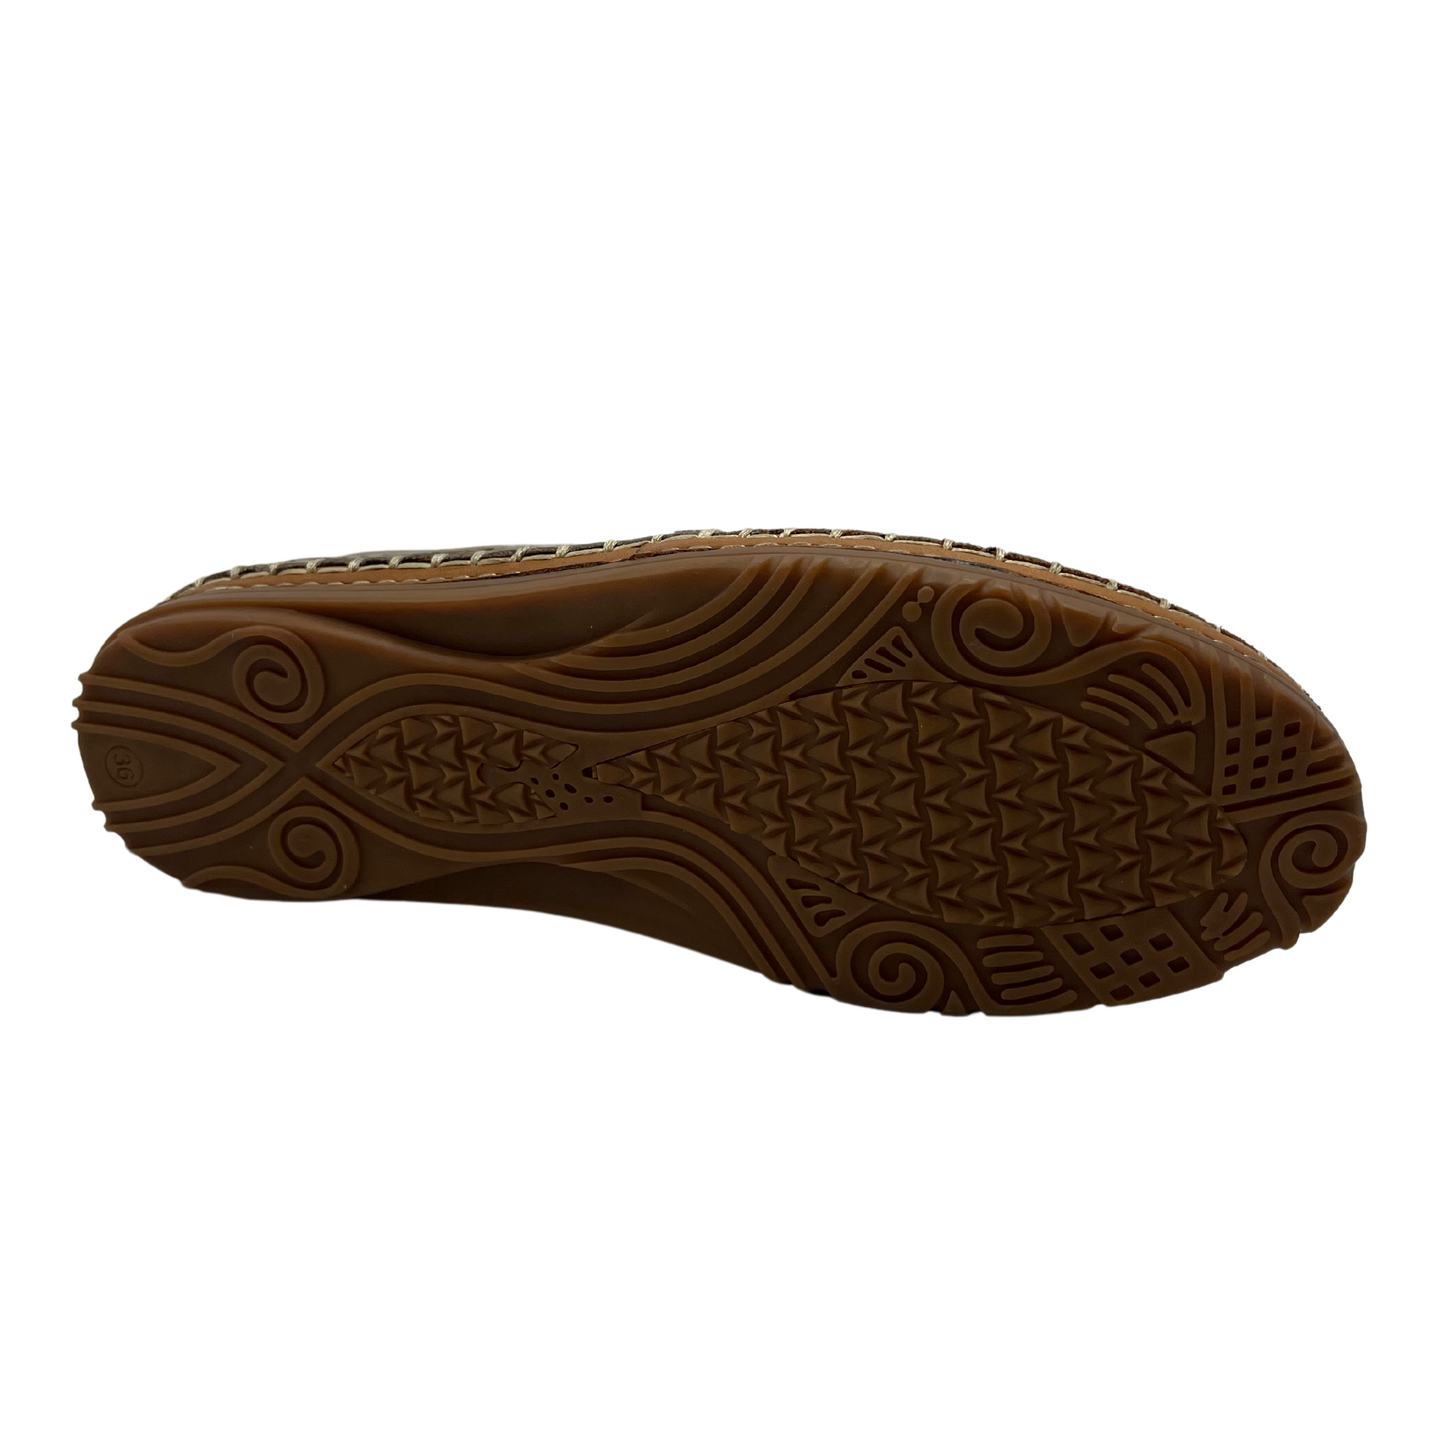 Bottom view of leather shoe with brown rubber outsole